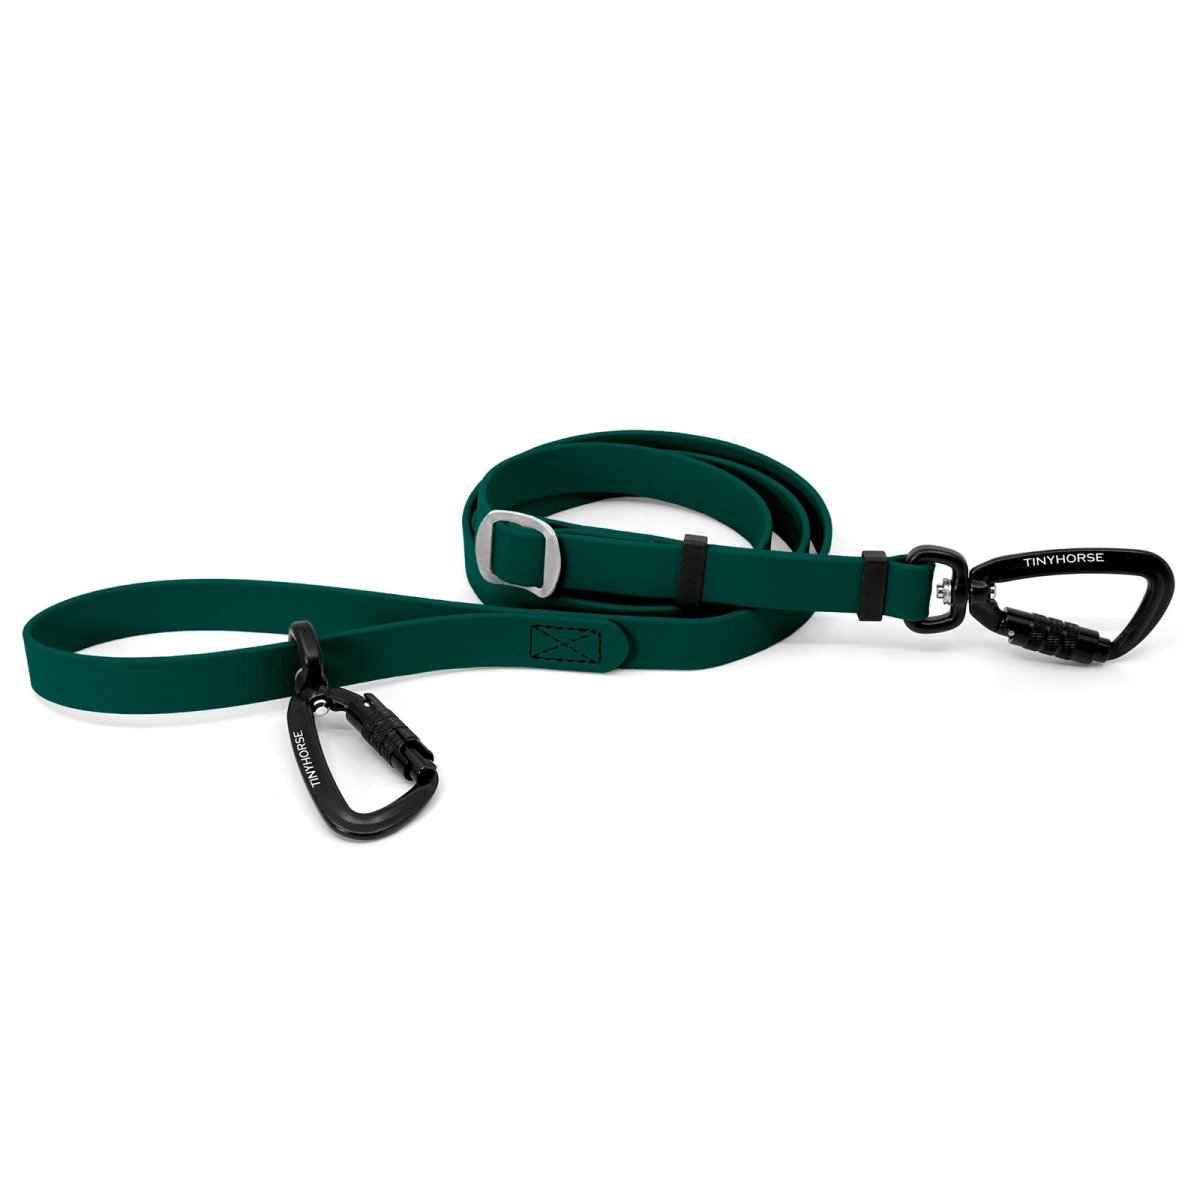 An adjustable green-coloured Lead-All Pro Extra made of BioThane with 2 auto-locking carabiners